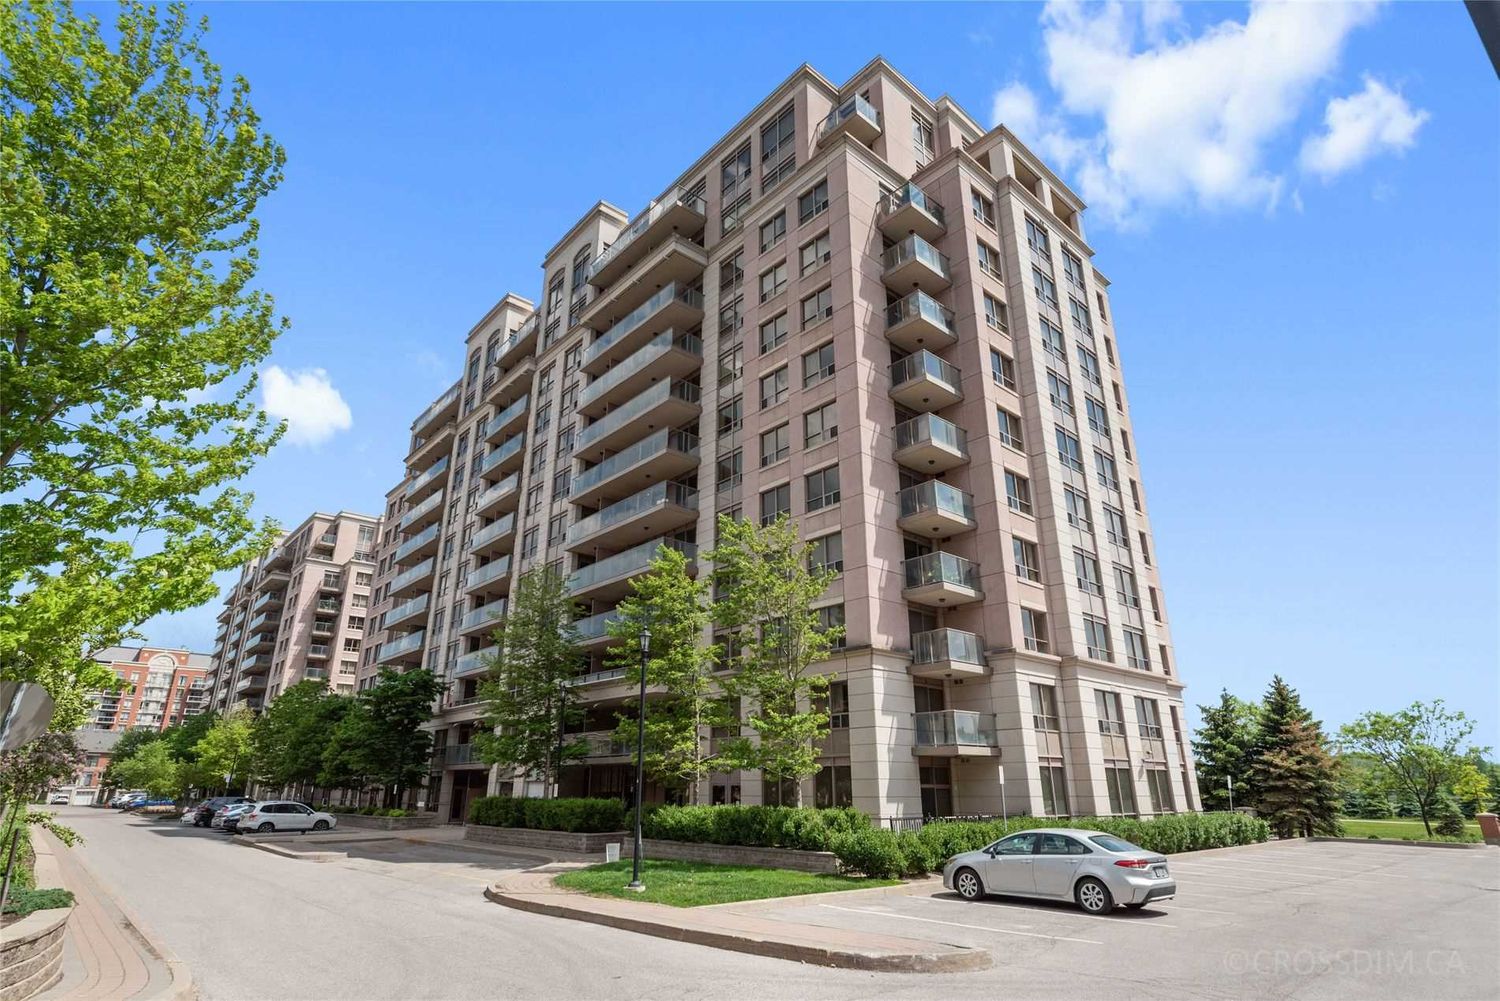 37-39 Galleria Parkway. Parkview Towers - Condos & Townhomes is located in  Markham, Toronto - image #1 of 2